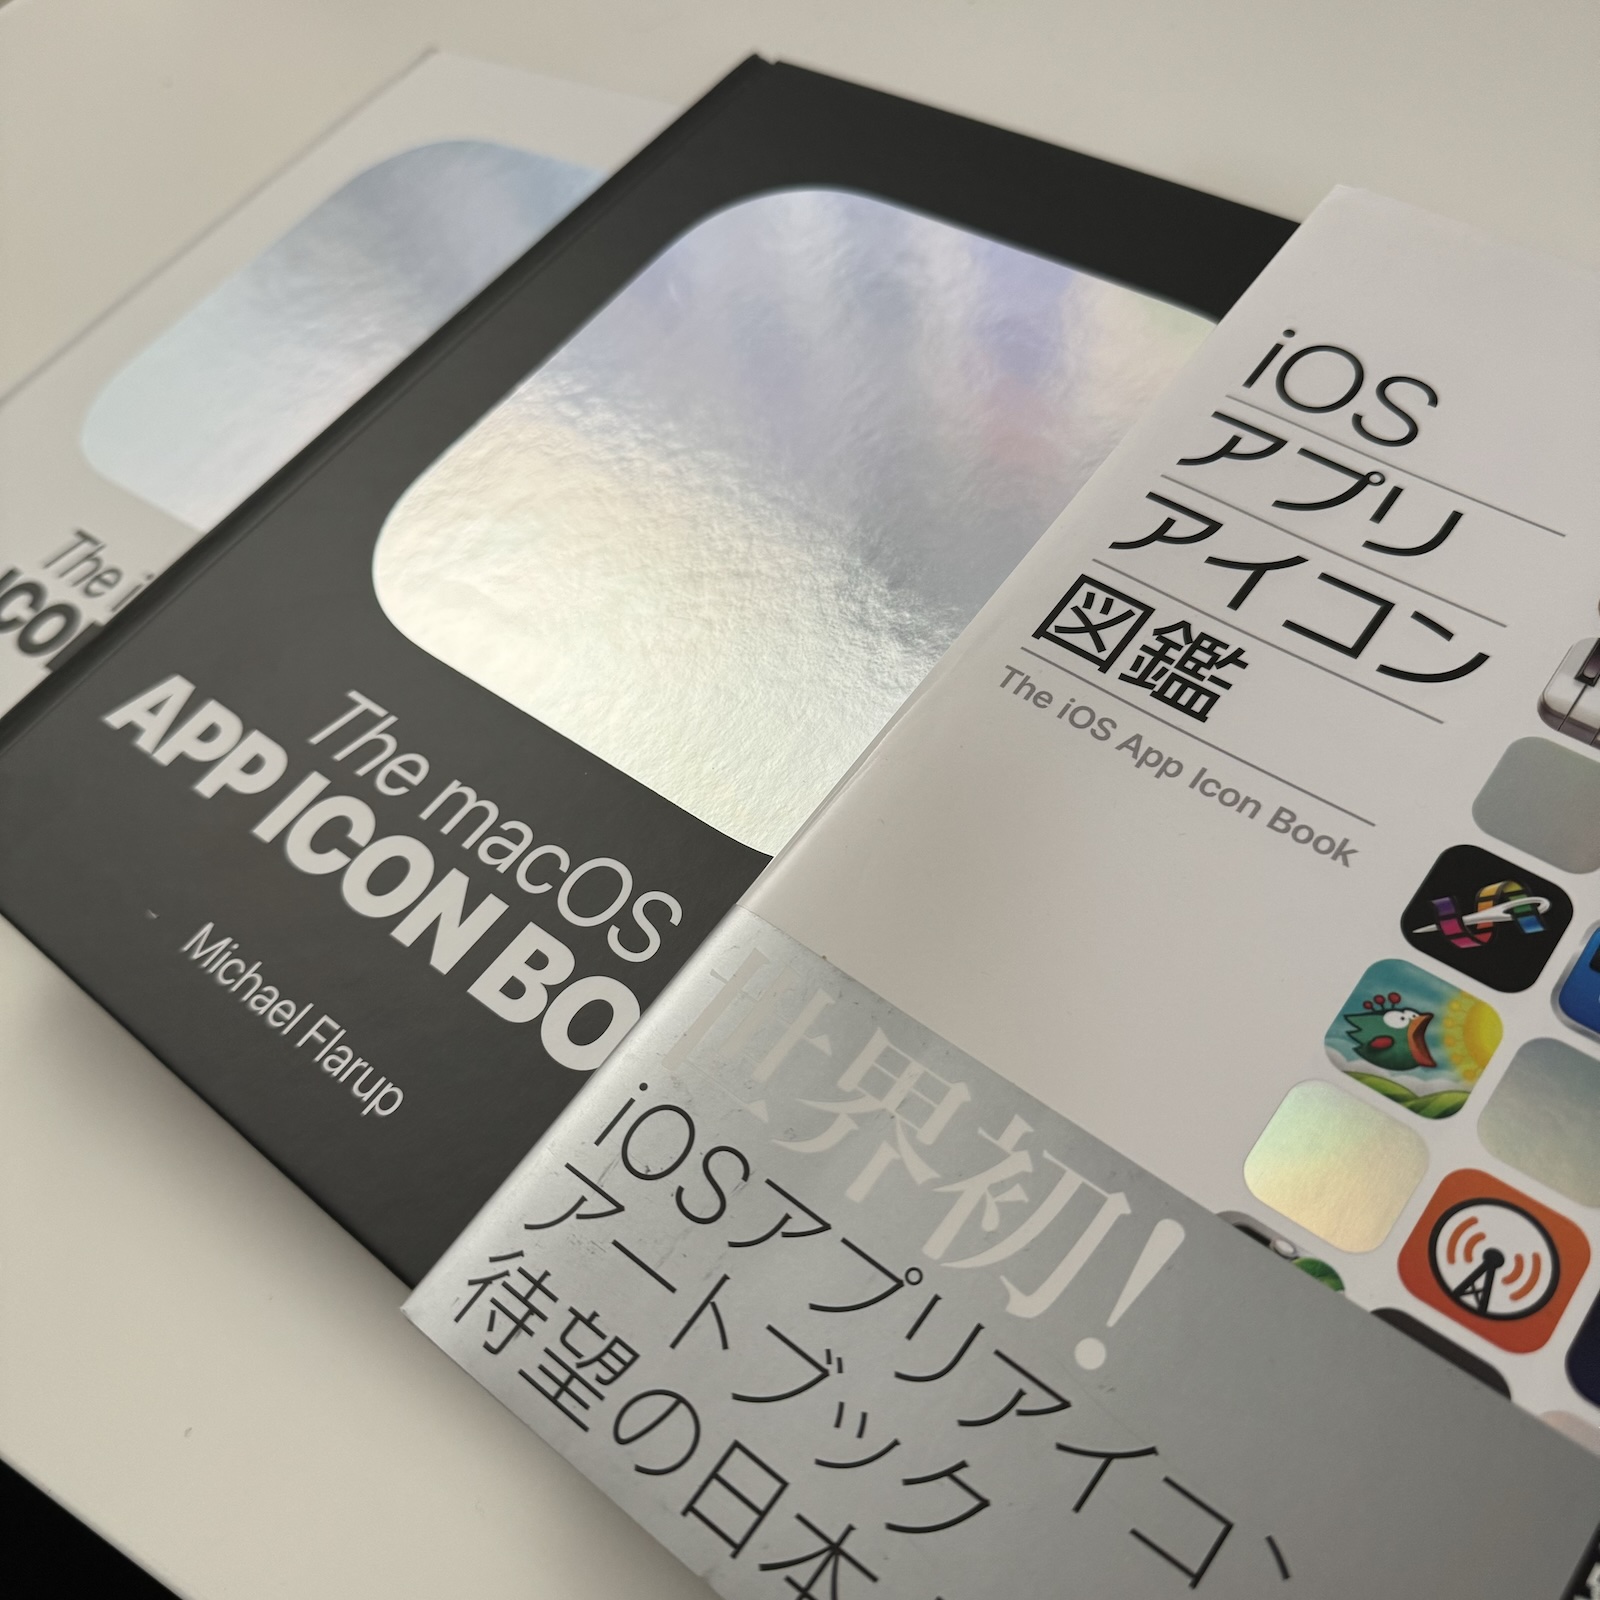 Photograph of “The iOS App Icon Book”, “The macOS App Icon Book” and “The iOS App Icon Book: Japanese Edition”.